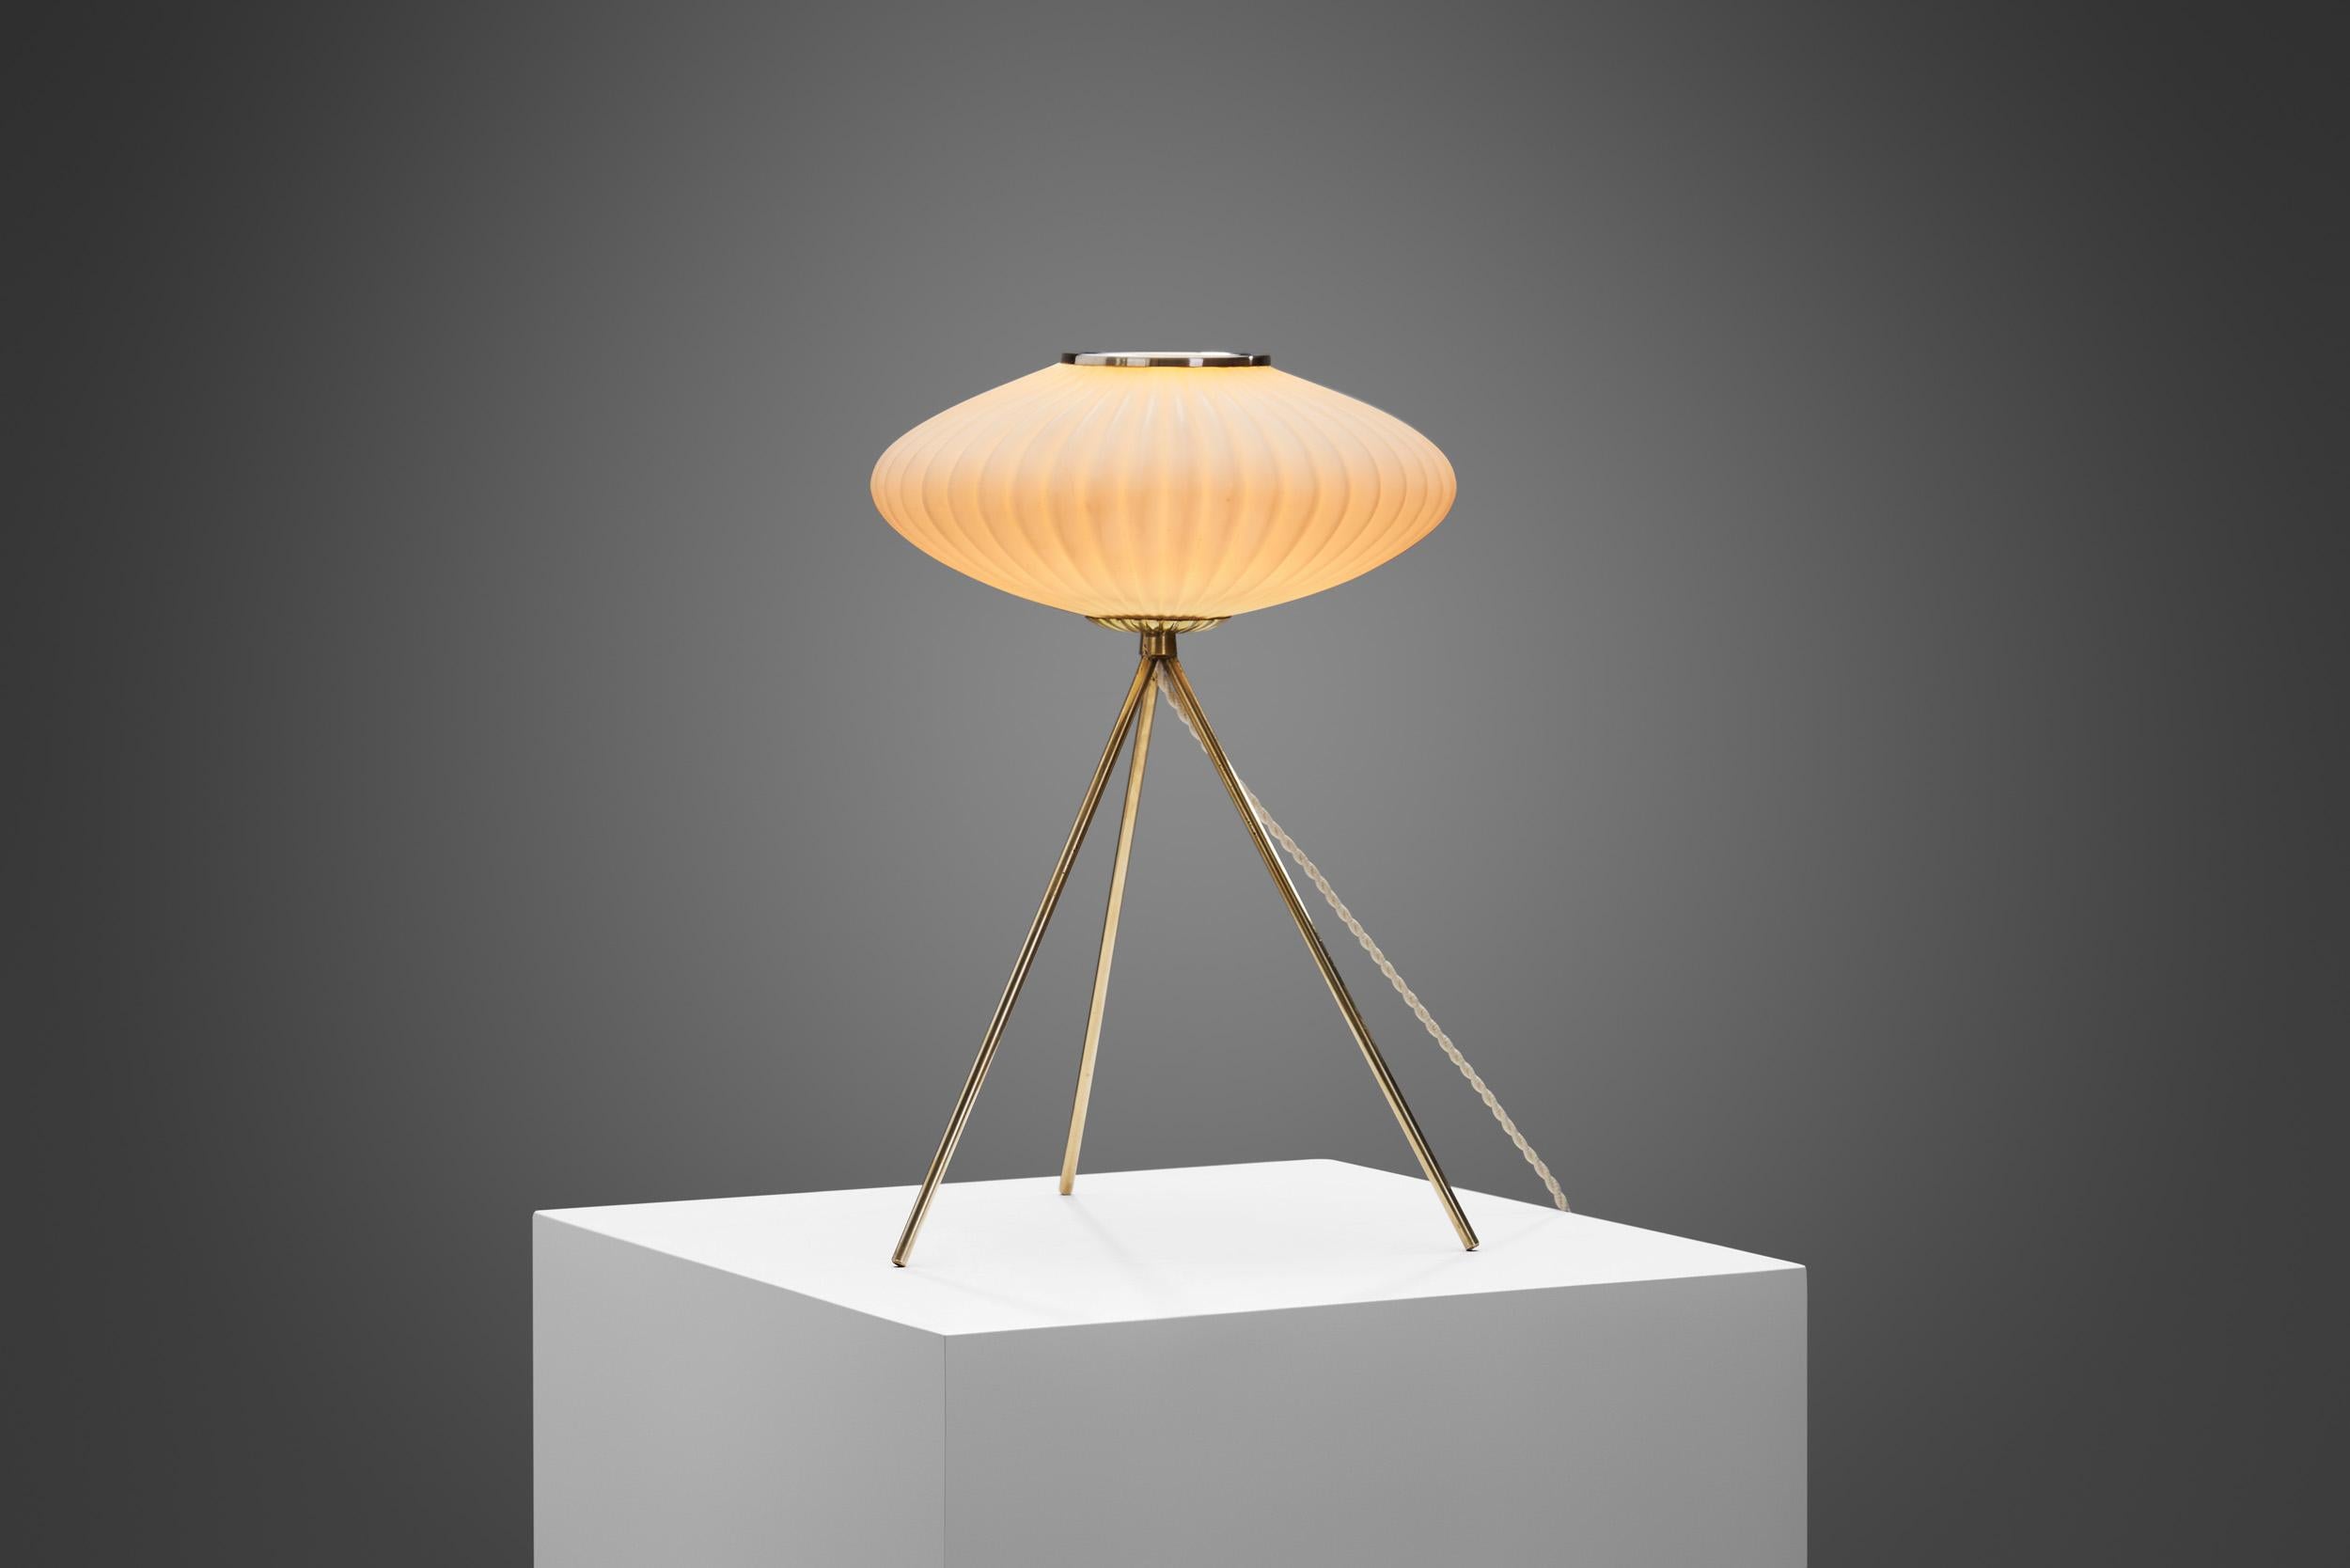 This one-of-a-kind table lamp is a delightfully distinctive model, with an immediately recognizable look. Design in the mid-century years was fuelled by the development of materials and technology with stunning results as seen in this lamp’s design.